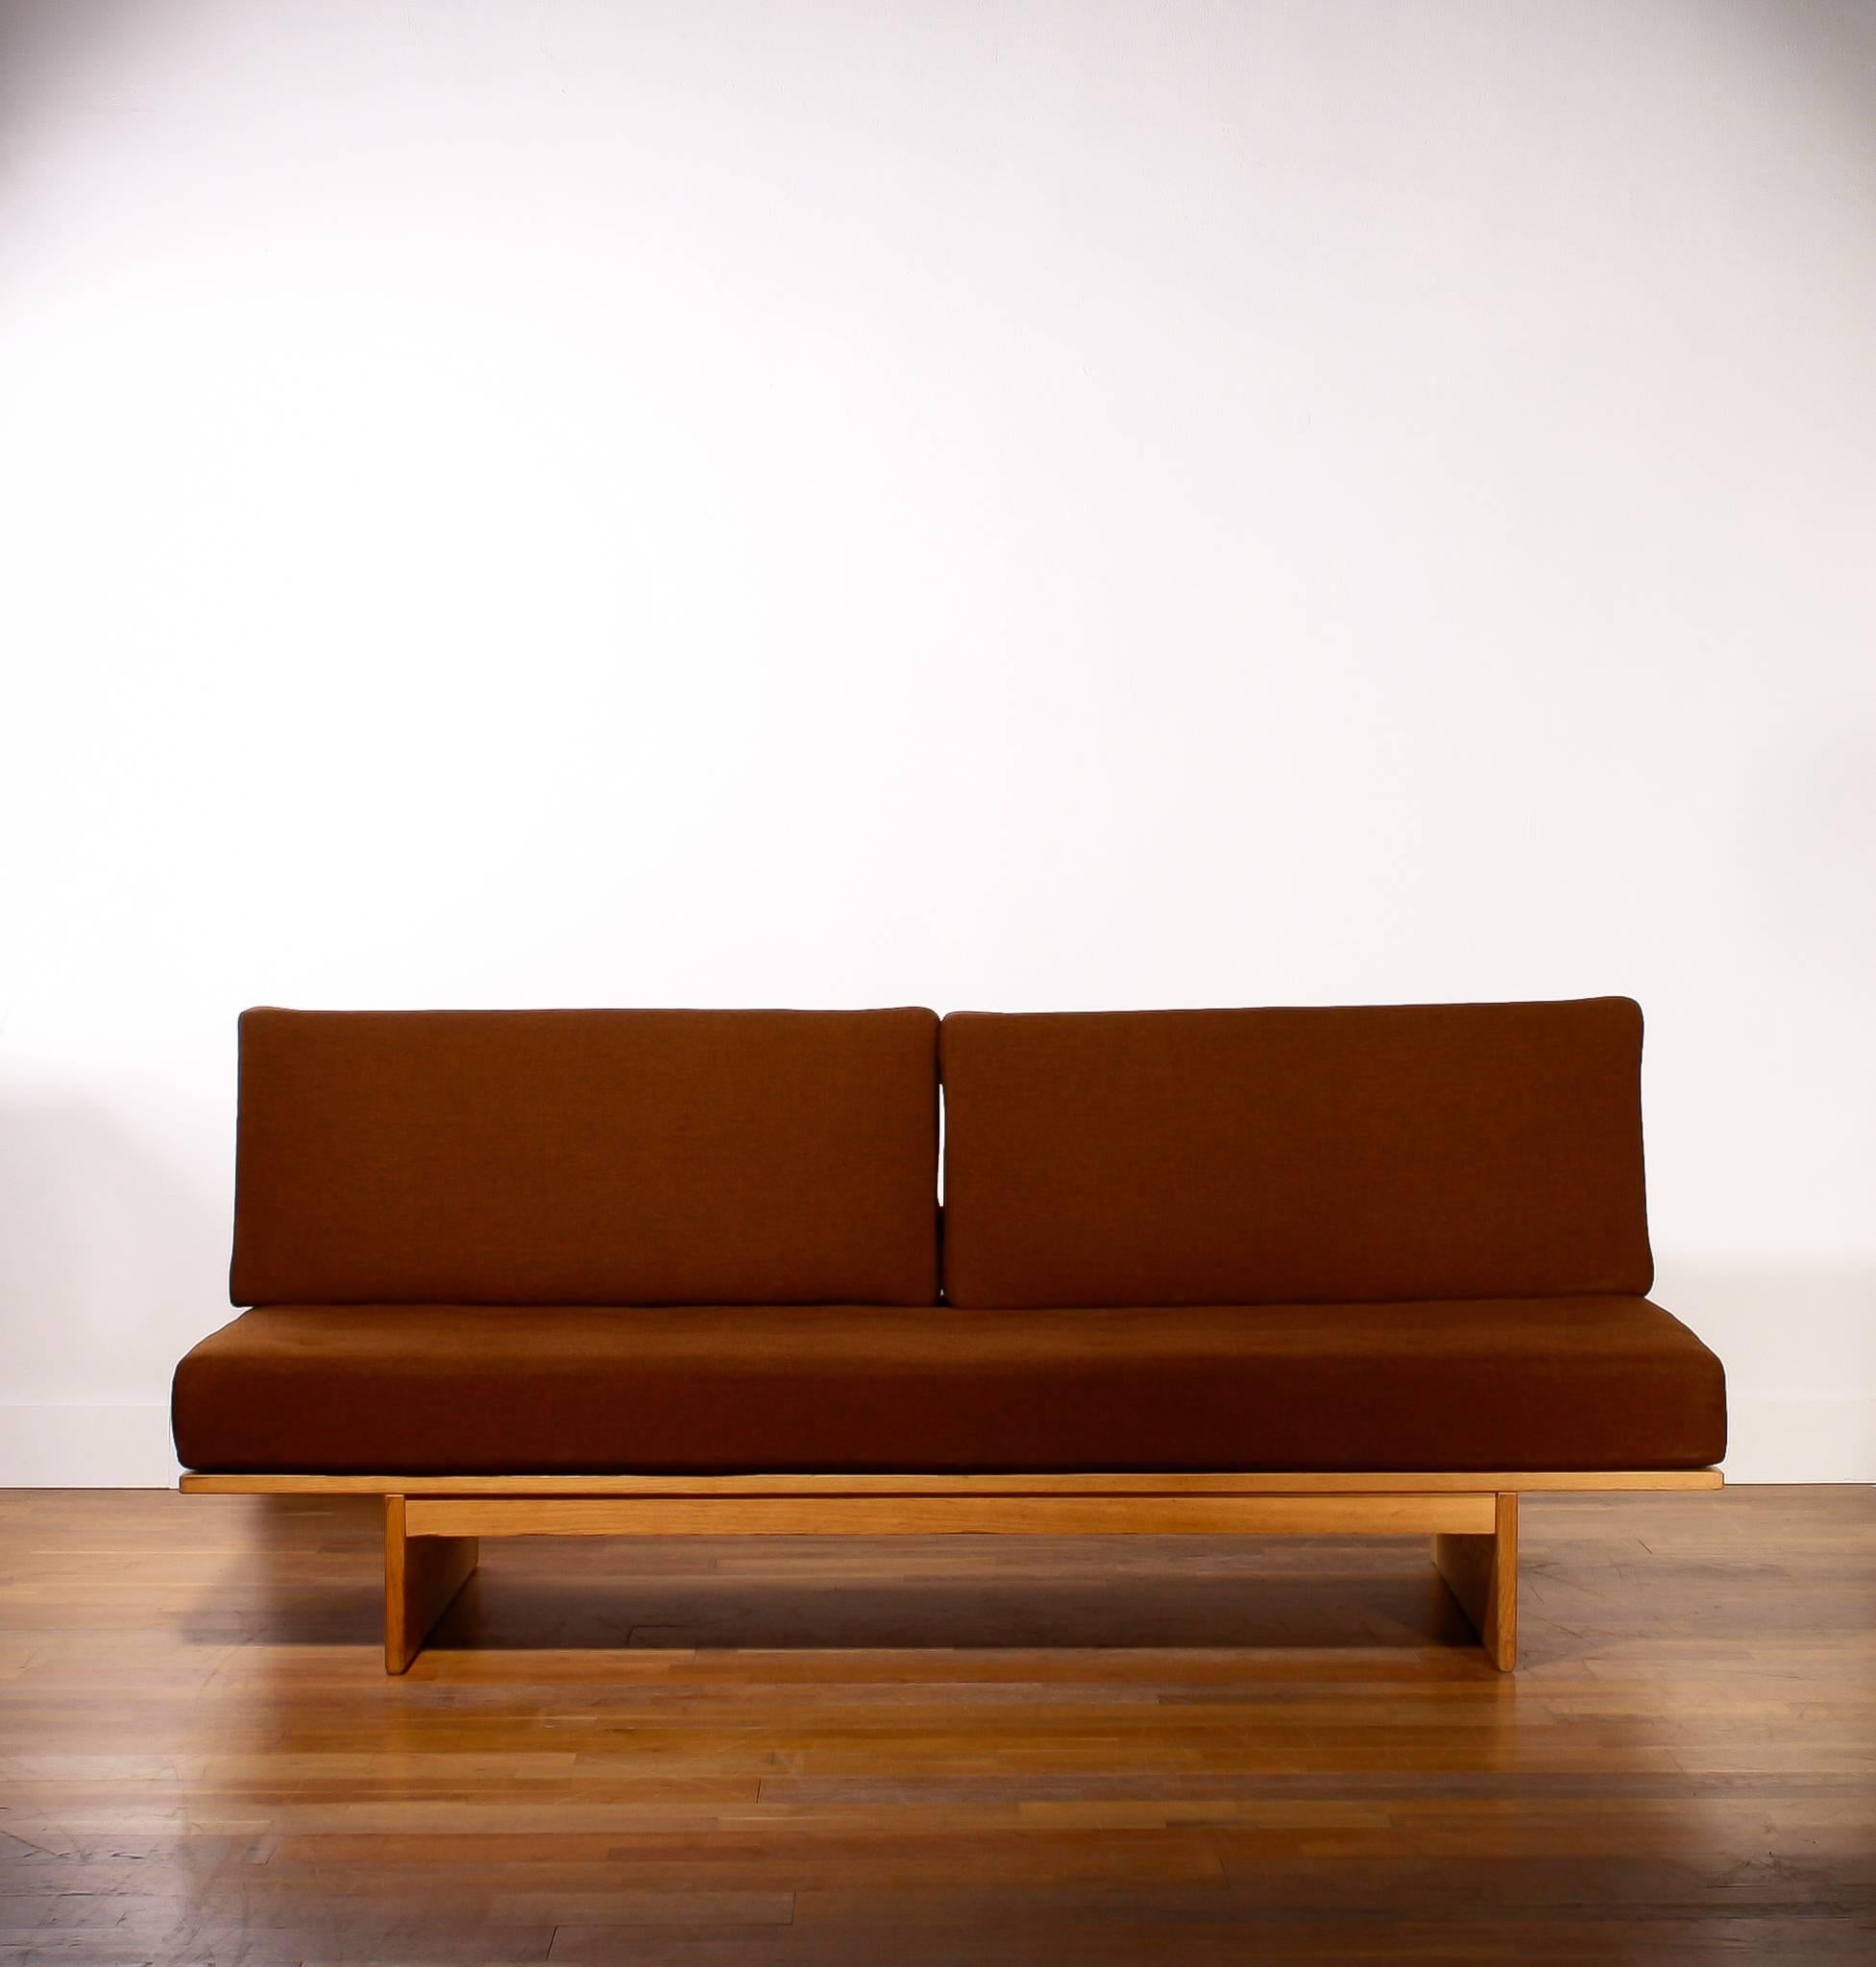 In absolute top condition sleeper/daybed in oak and dark brown wool.

The oak wooden frame and the dark brown wool upholstery are in excellent condition.

Designed by Bra Bohag.

Manufactured by Dux.

Design period 1960-1969.

The